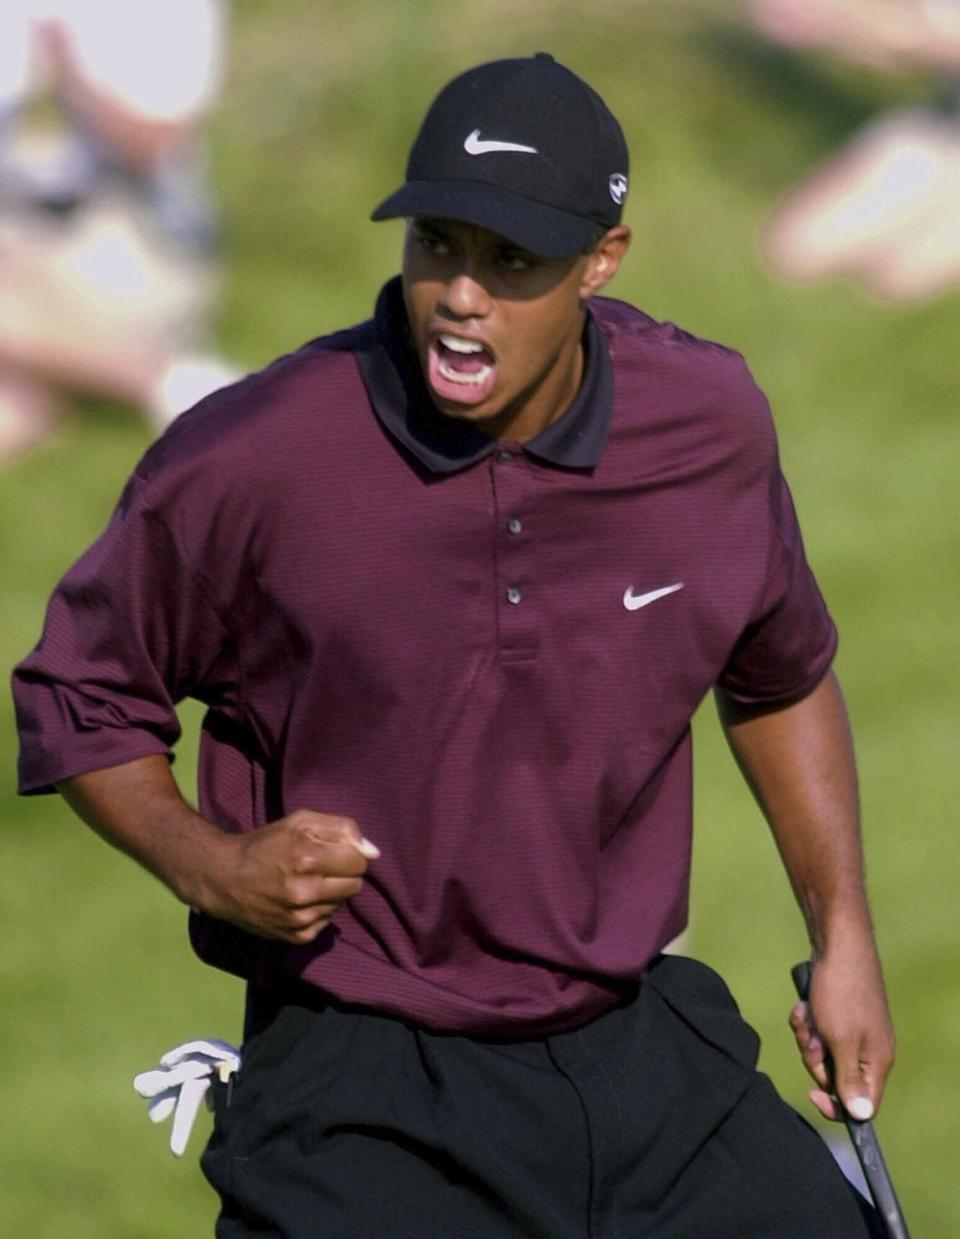 FILE - Tiger Woods celebrates making birdie on the last of regulation play to tie Bob May at 18 under-par and force a playoff at the PGA Championship on Aug. 20, 2000, at Valhalla Golf Club in Louisville, Ky. Valhalla will be hosting the PGA Championship for the fourth time May 16-19, 2024. (AP Photo/Rob Carr, File)